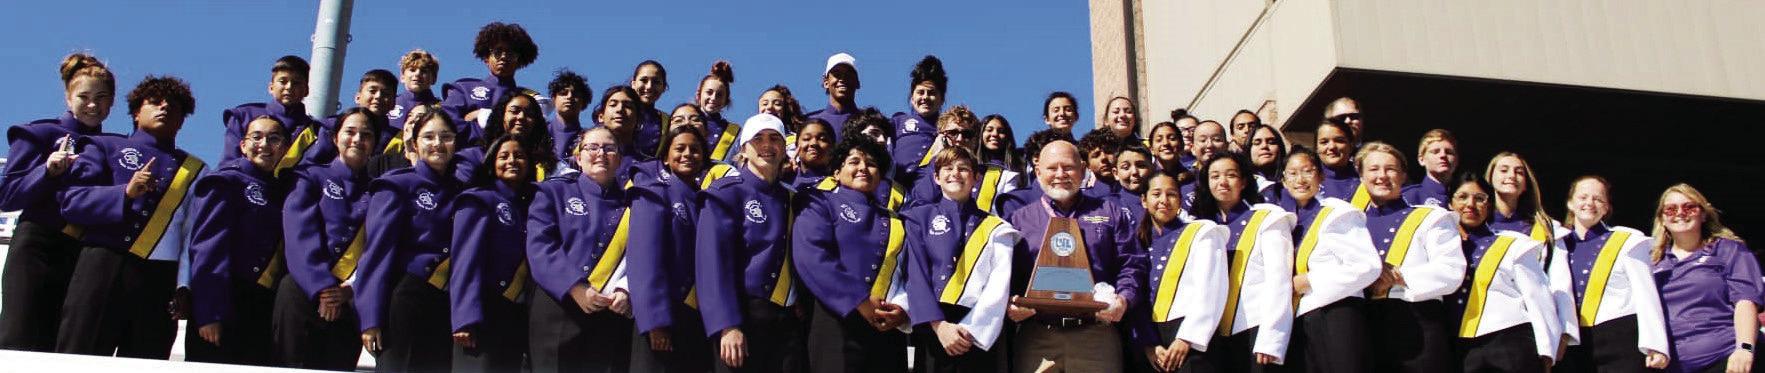 MUNDAYBAND Congratulations to the Purple Cloud Band on receiving unanimous first divisions from all judgesattheUILConcertandSightReadinginSeymourlastweek.Thiscompletestheirseventhconsecutive UIL Sweepstakes award. (First divisions in marching, concert, and sight reading) | COURTESY PHOTO